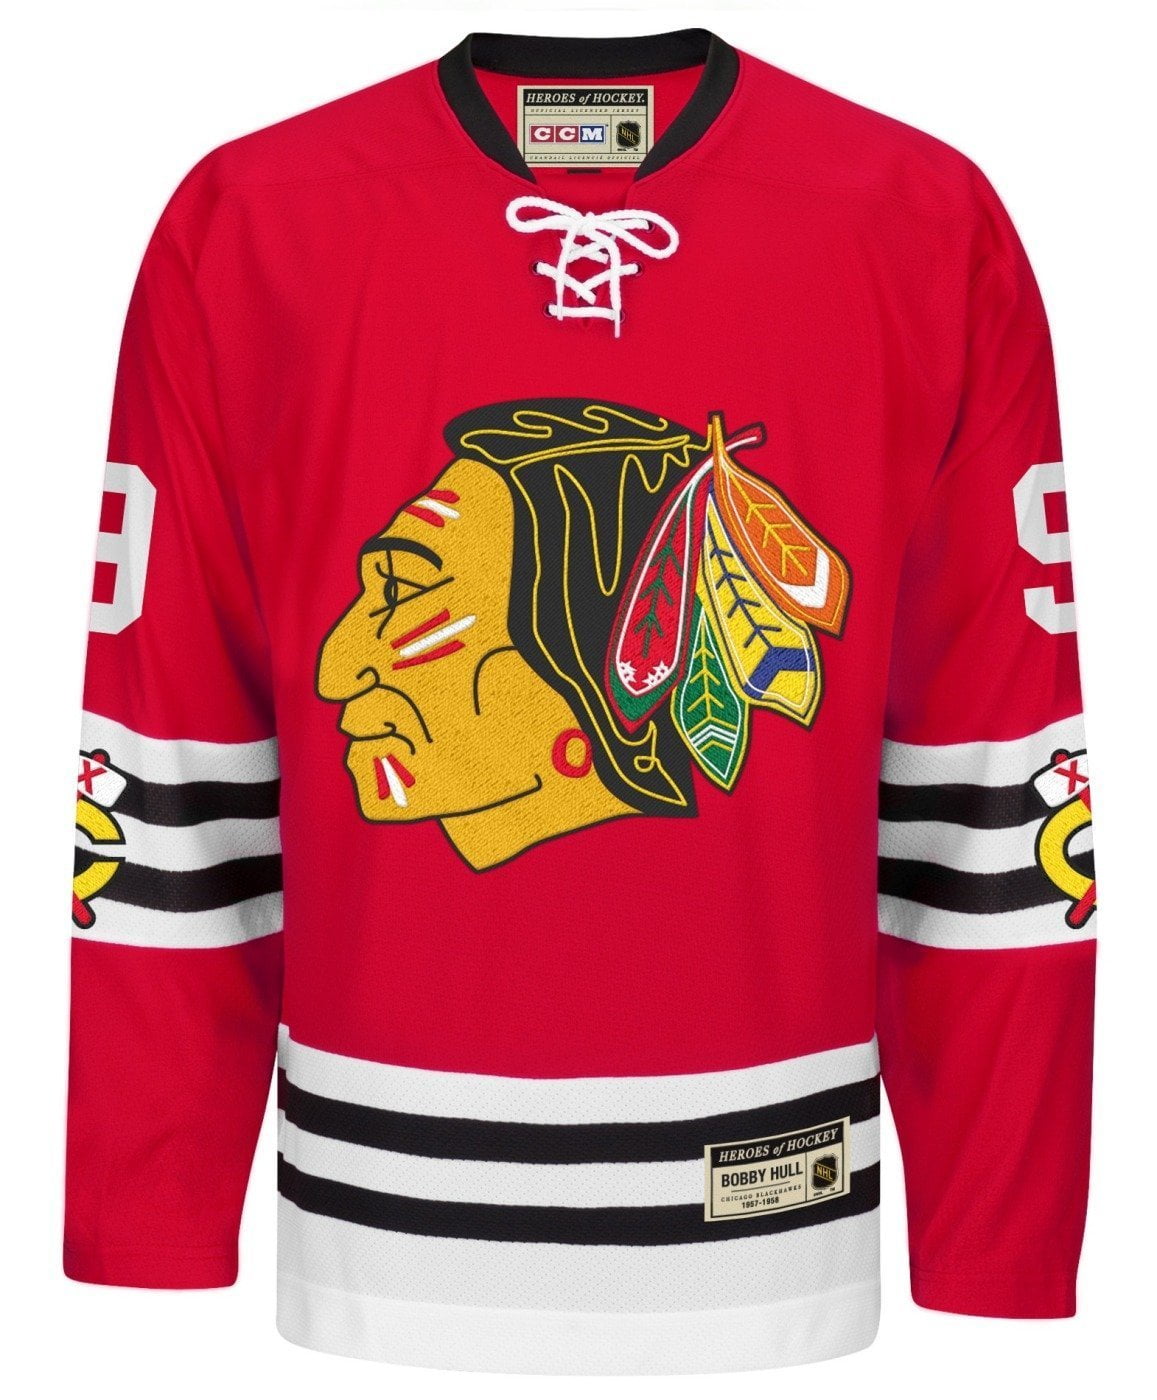 blackhawks jersey with strings